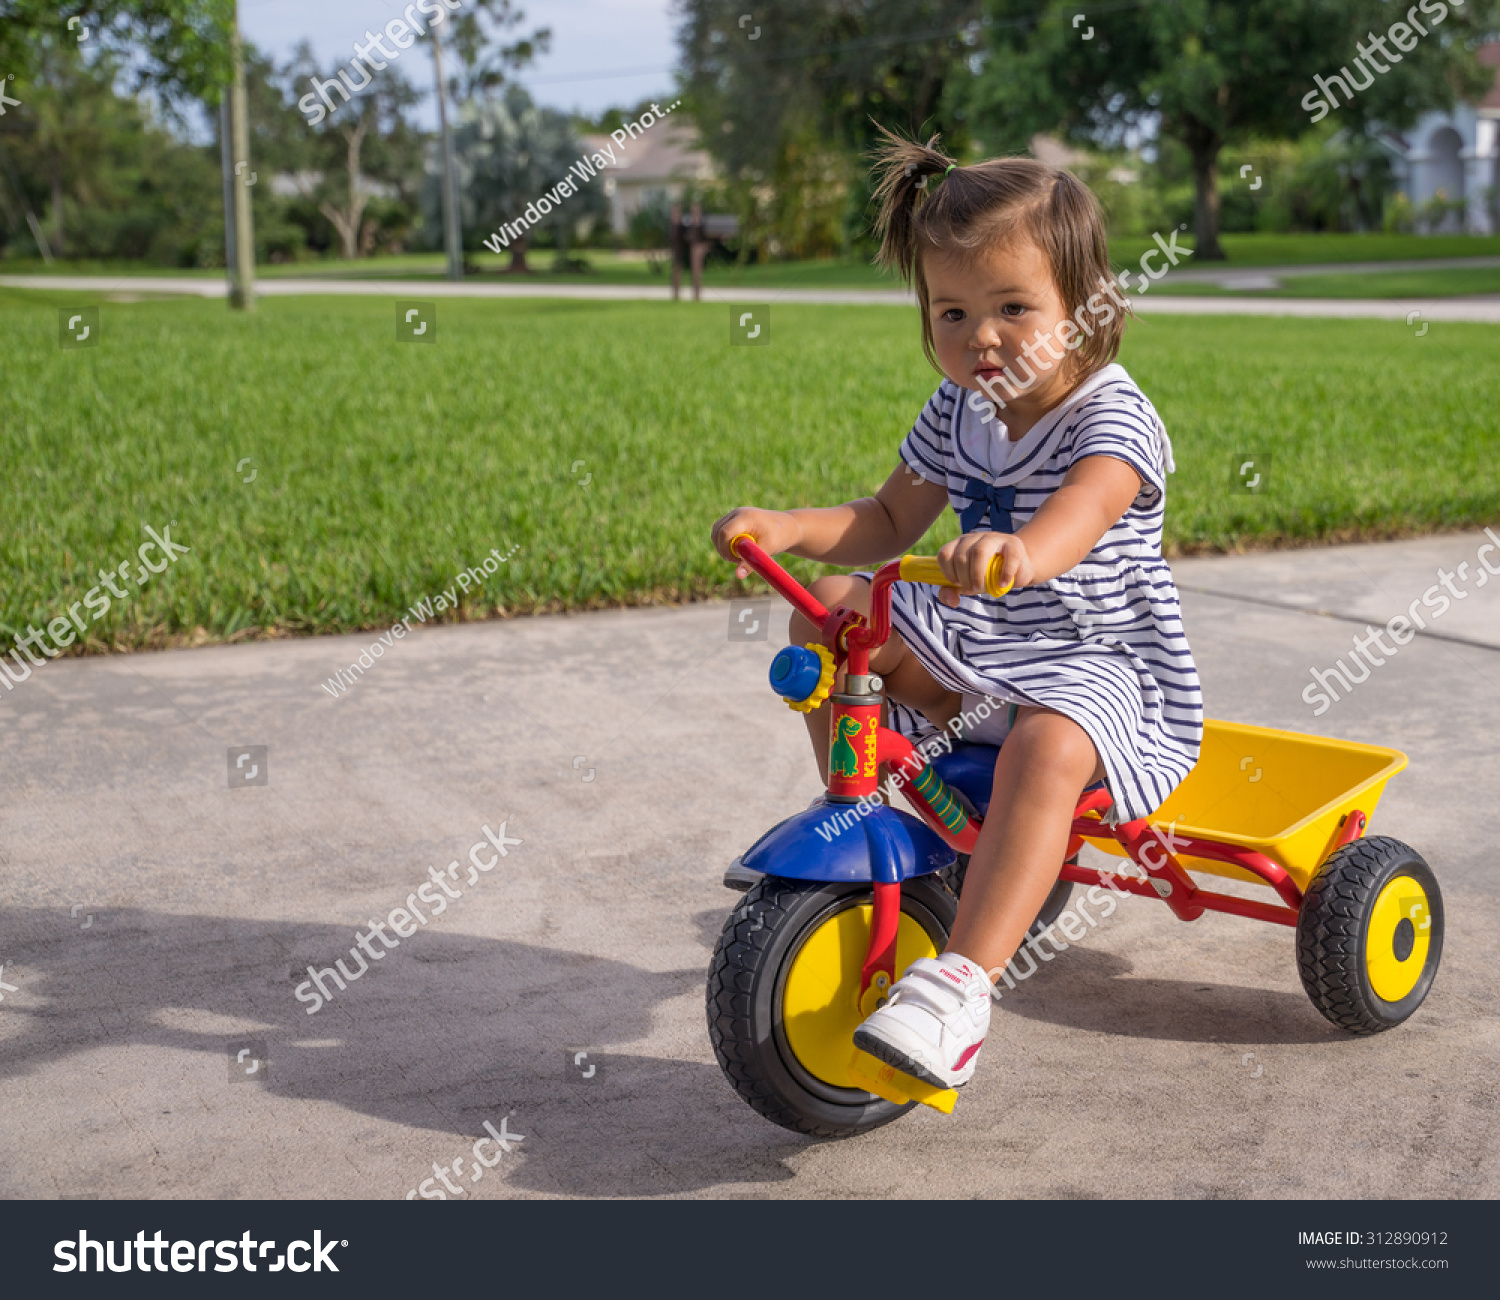 girl riding tricycle